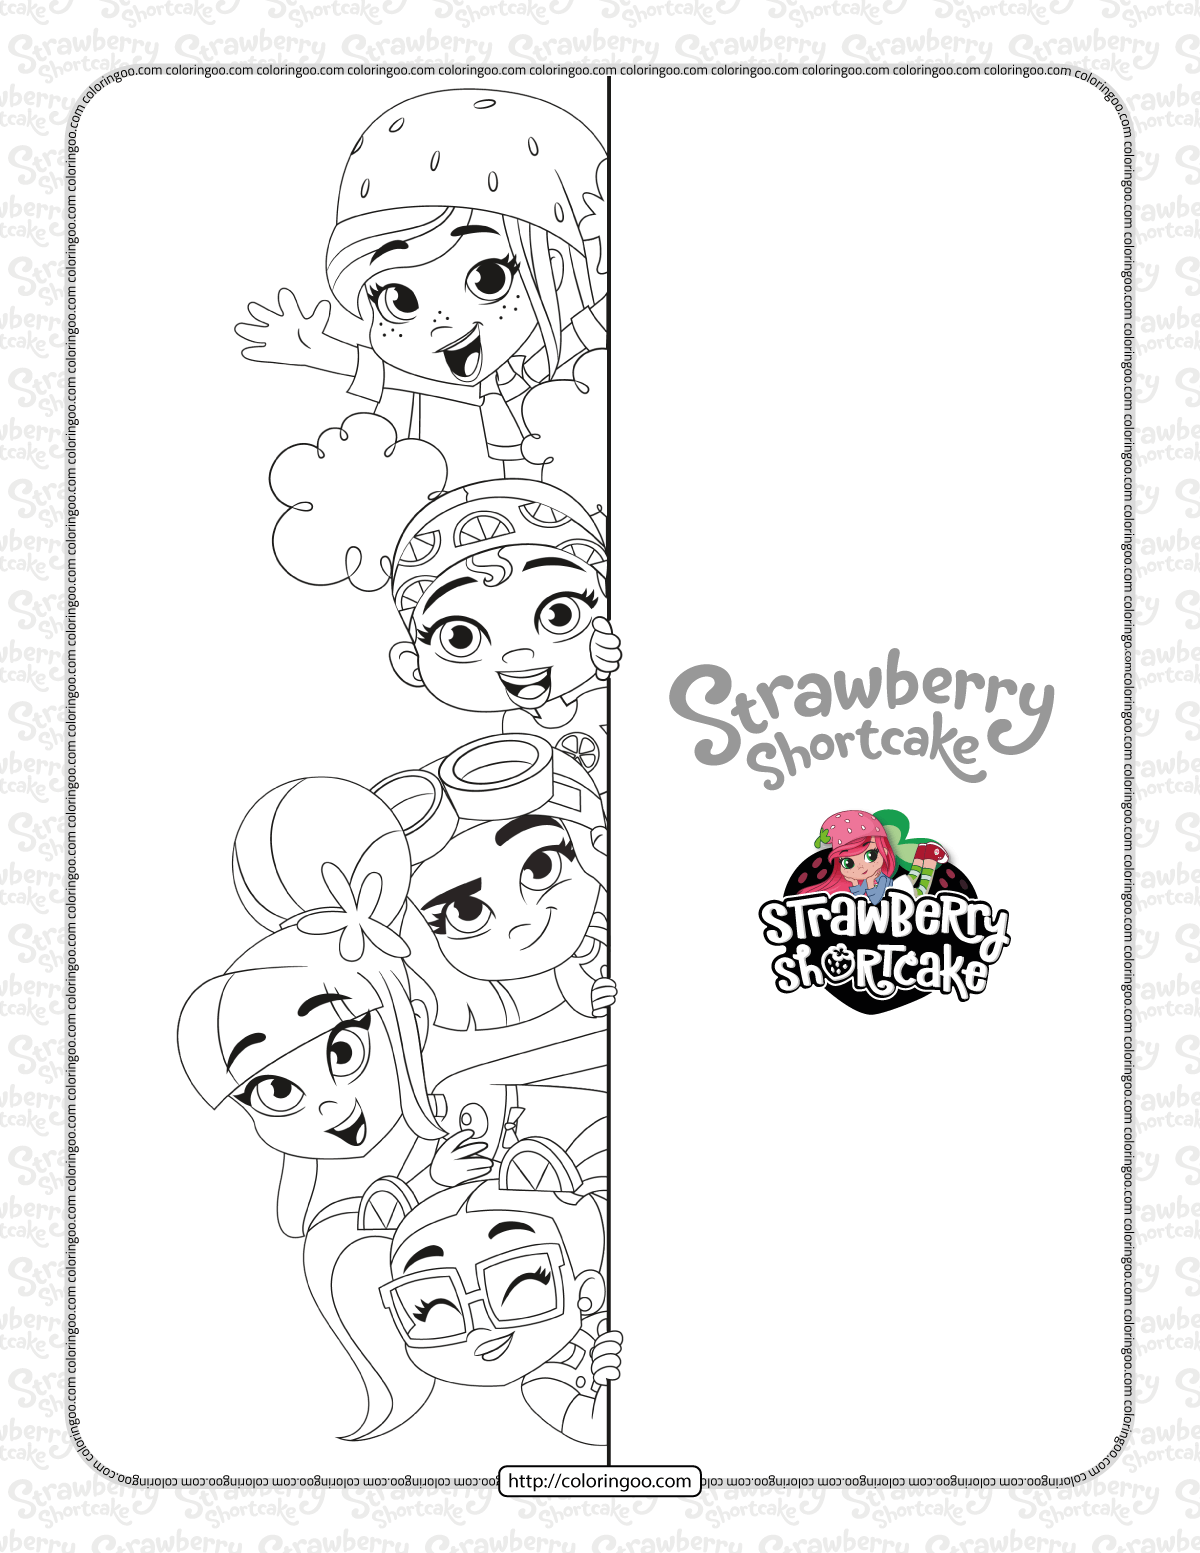 strawberry shortcake new coloring activities